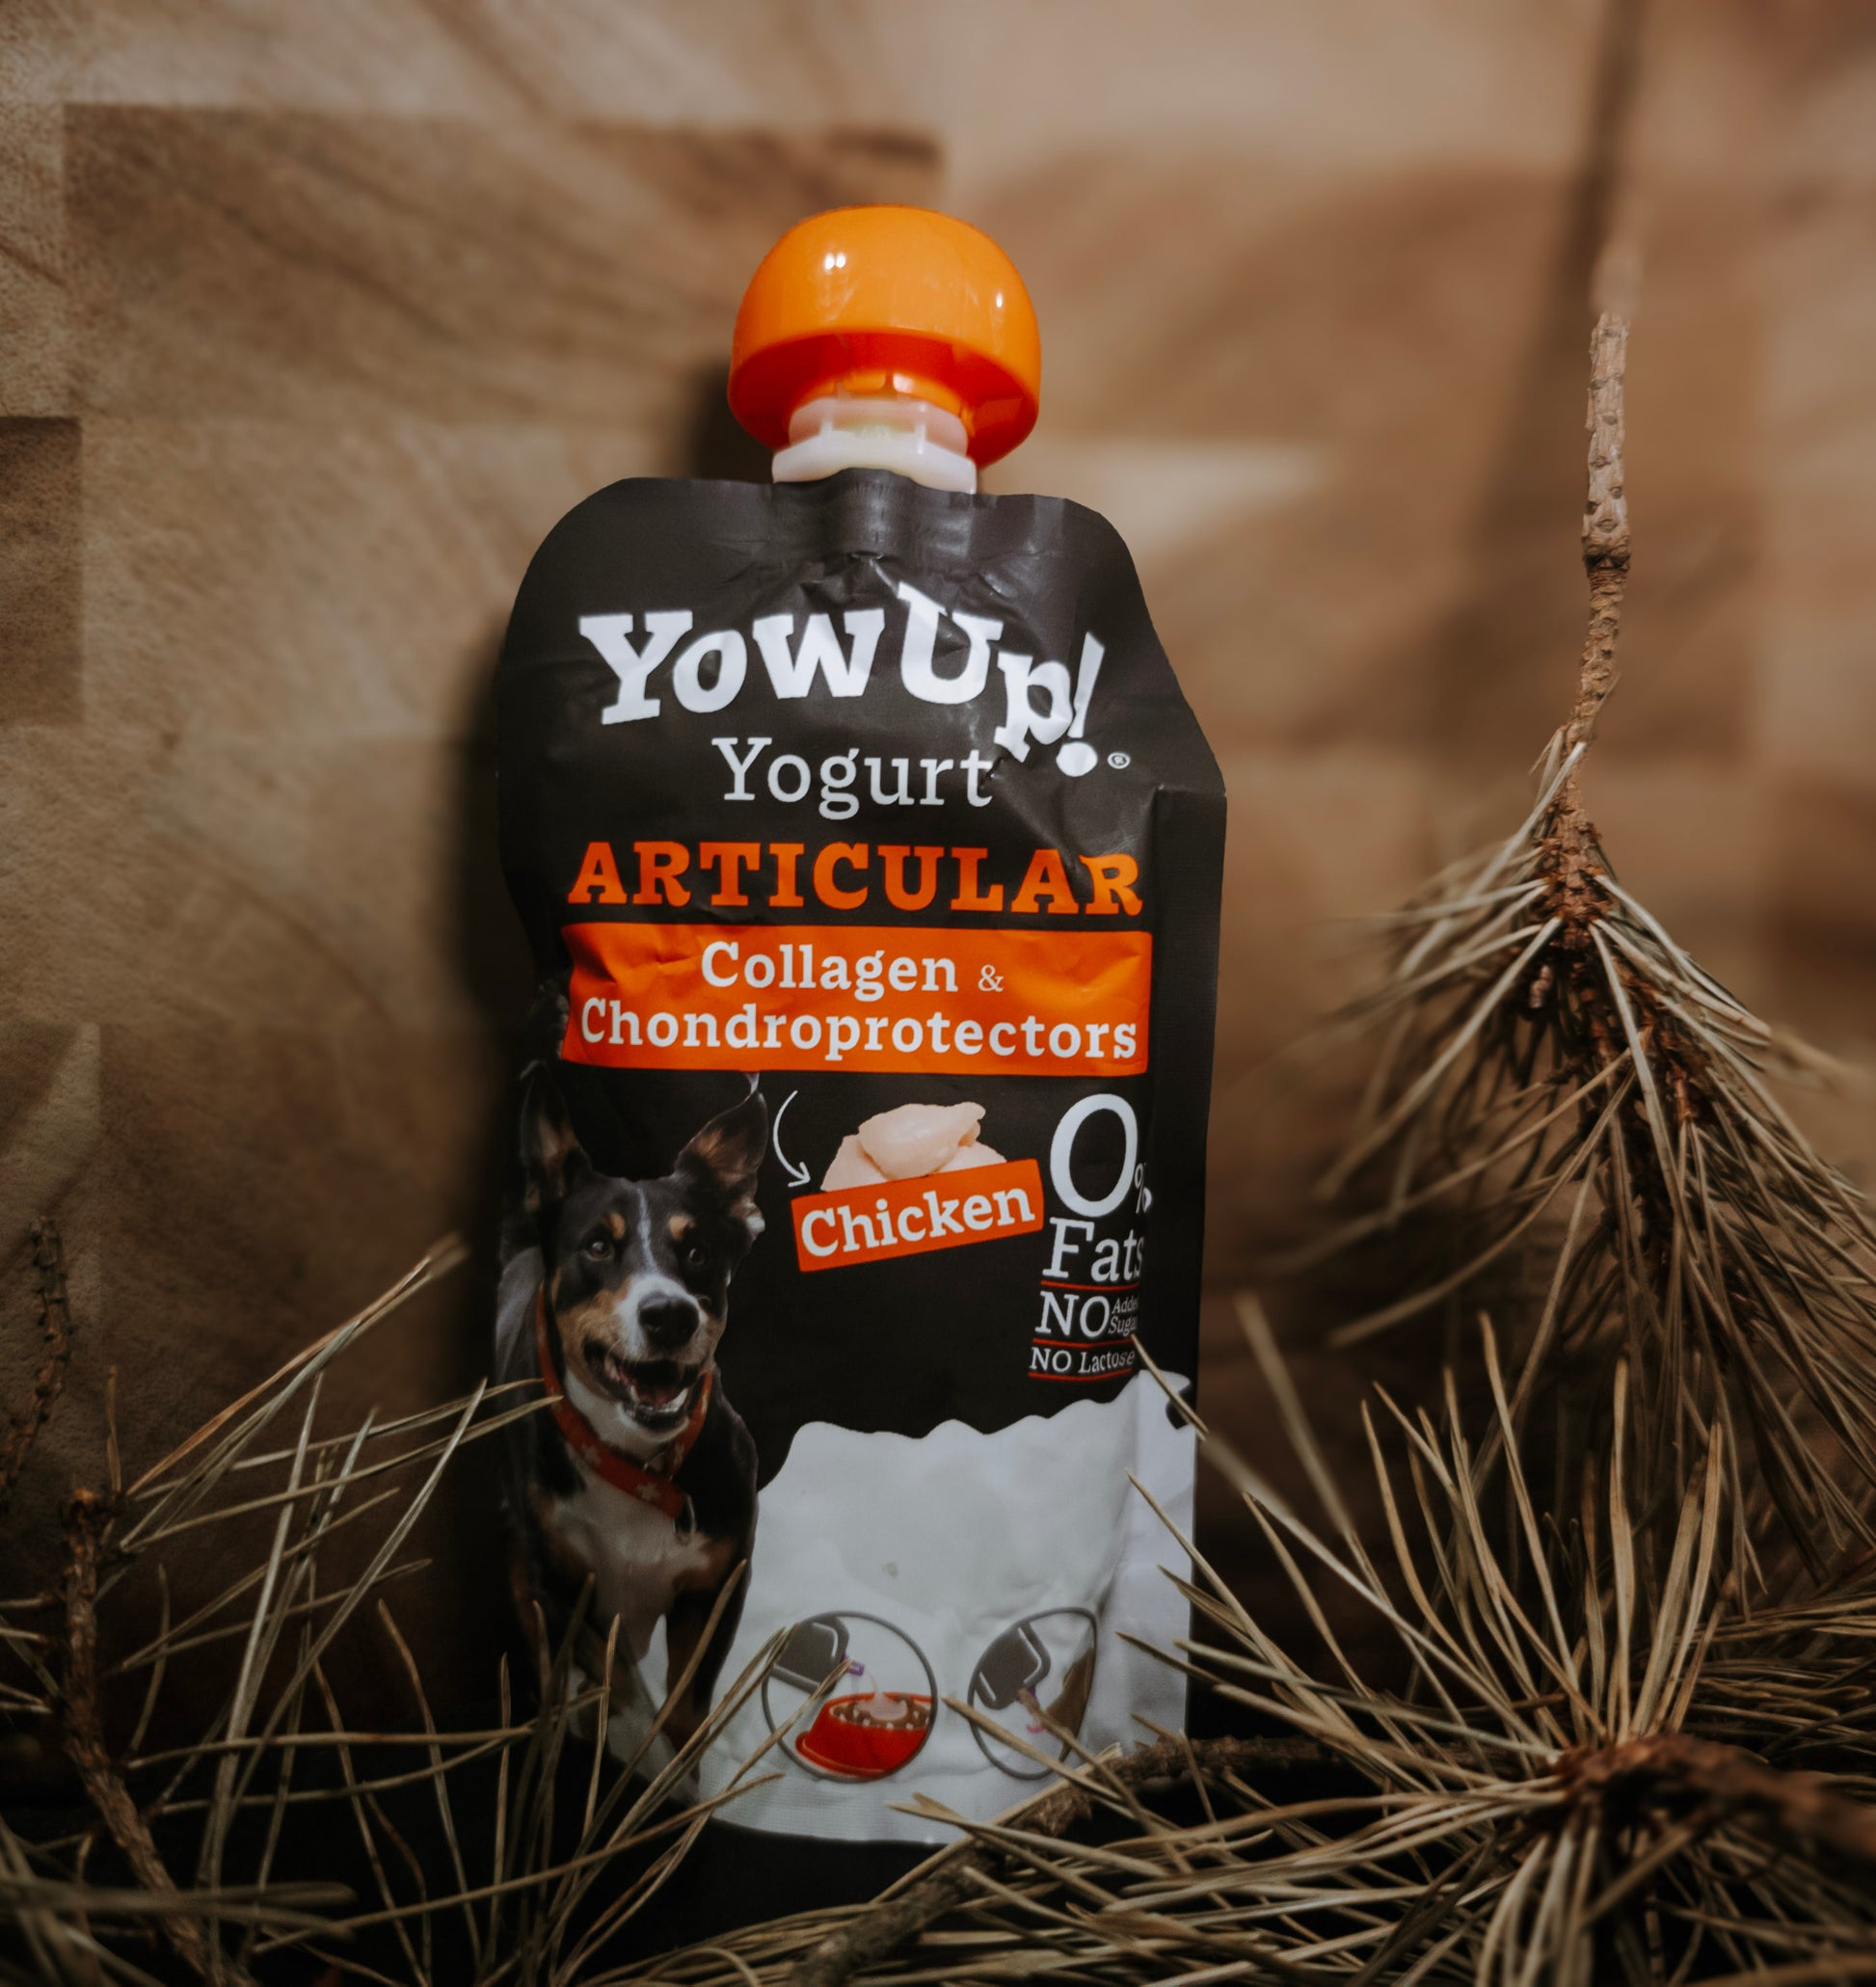 YowUp Dog Yoghurt Articular - Collagen & Chondroprotectors - Bodhi & The Birchtree